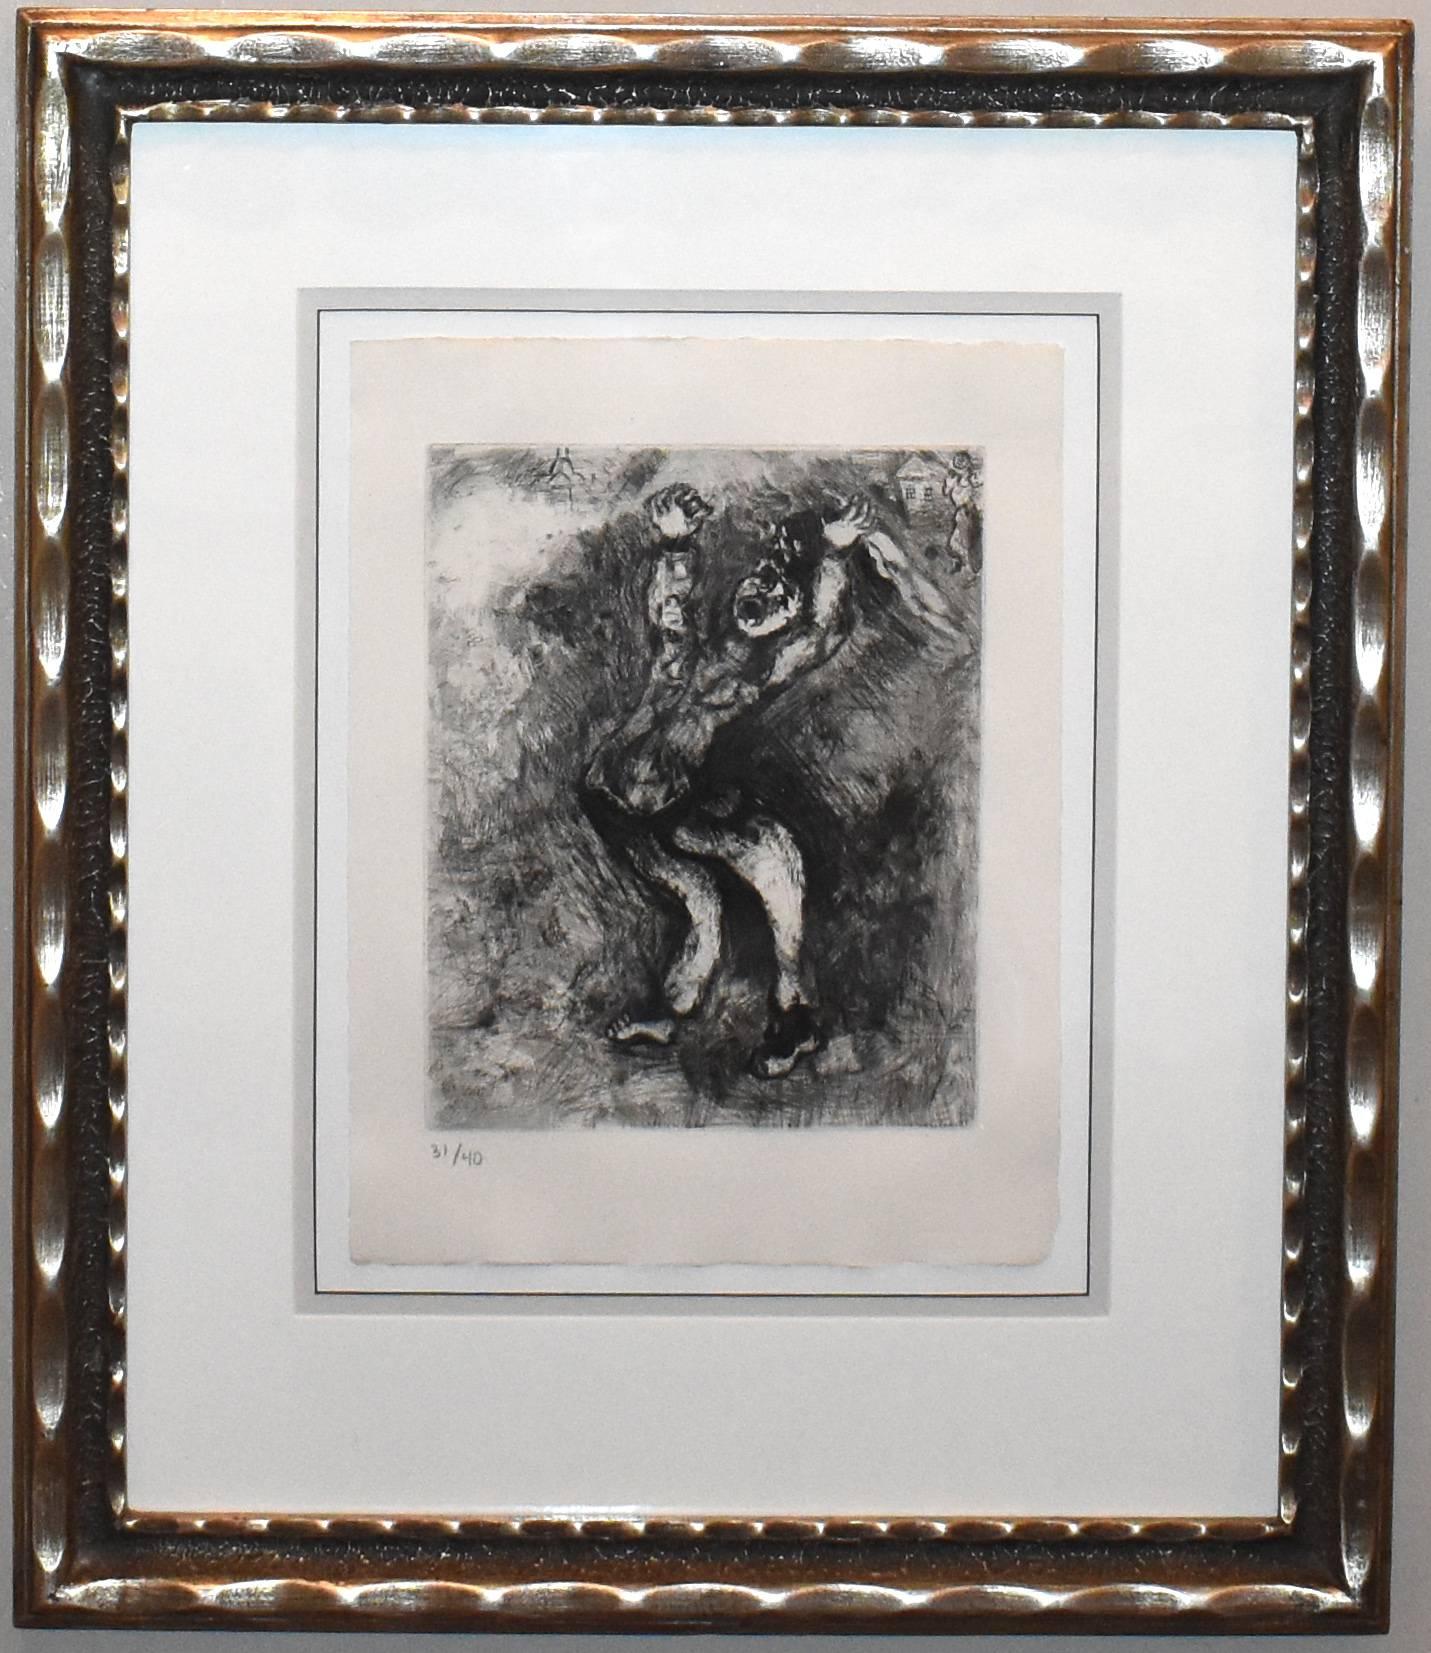 The Eccentric Who Sells Wisdom - Print by Marc Chagall